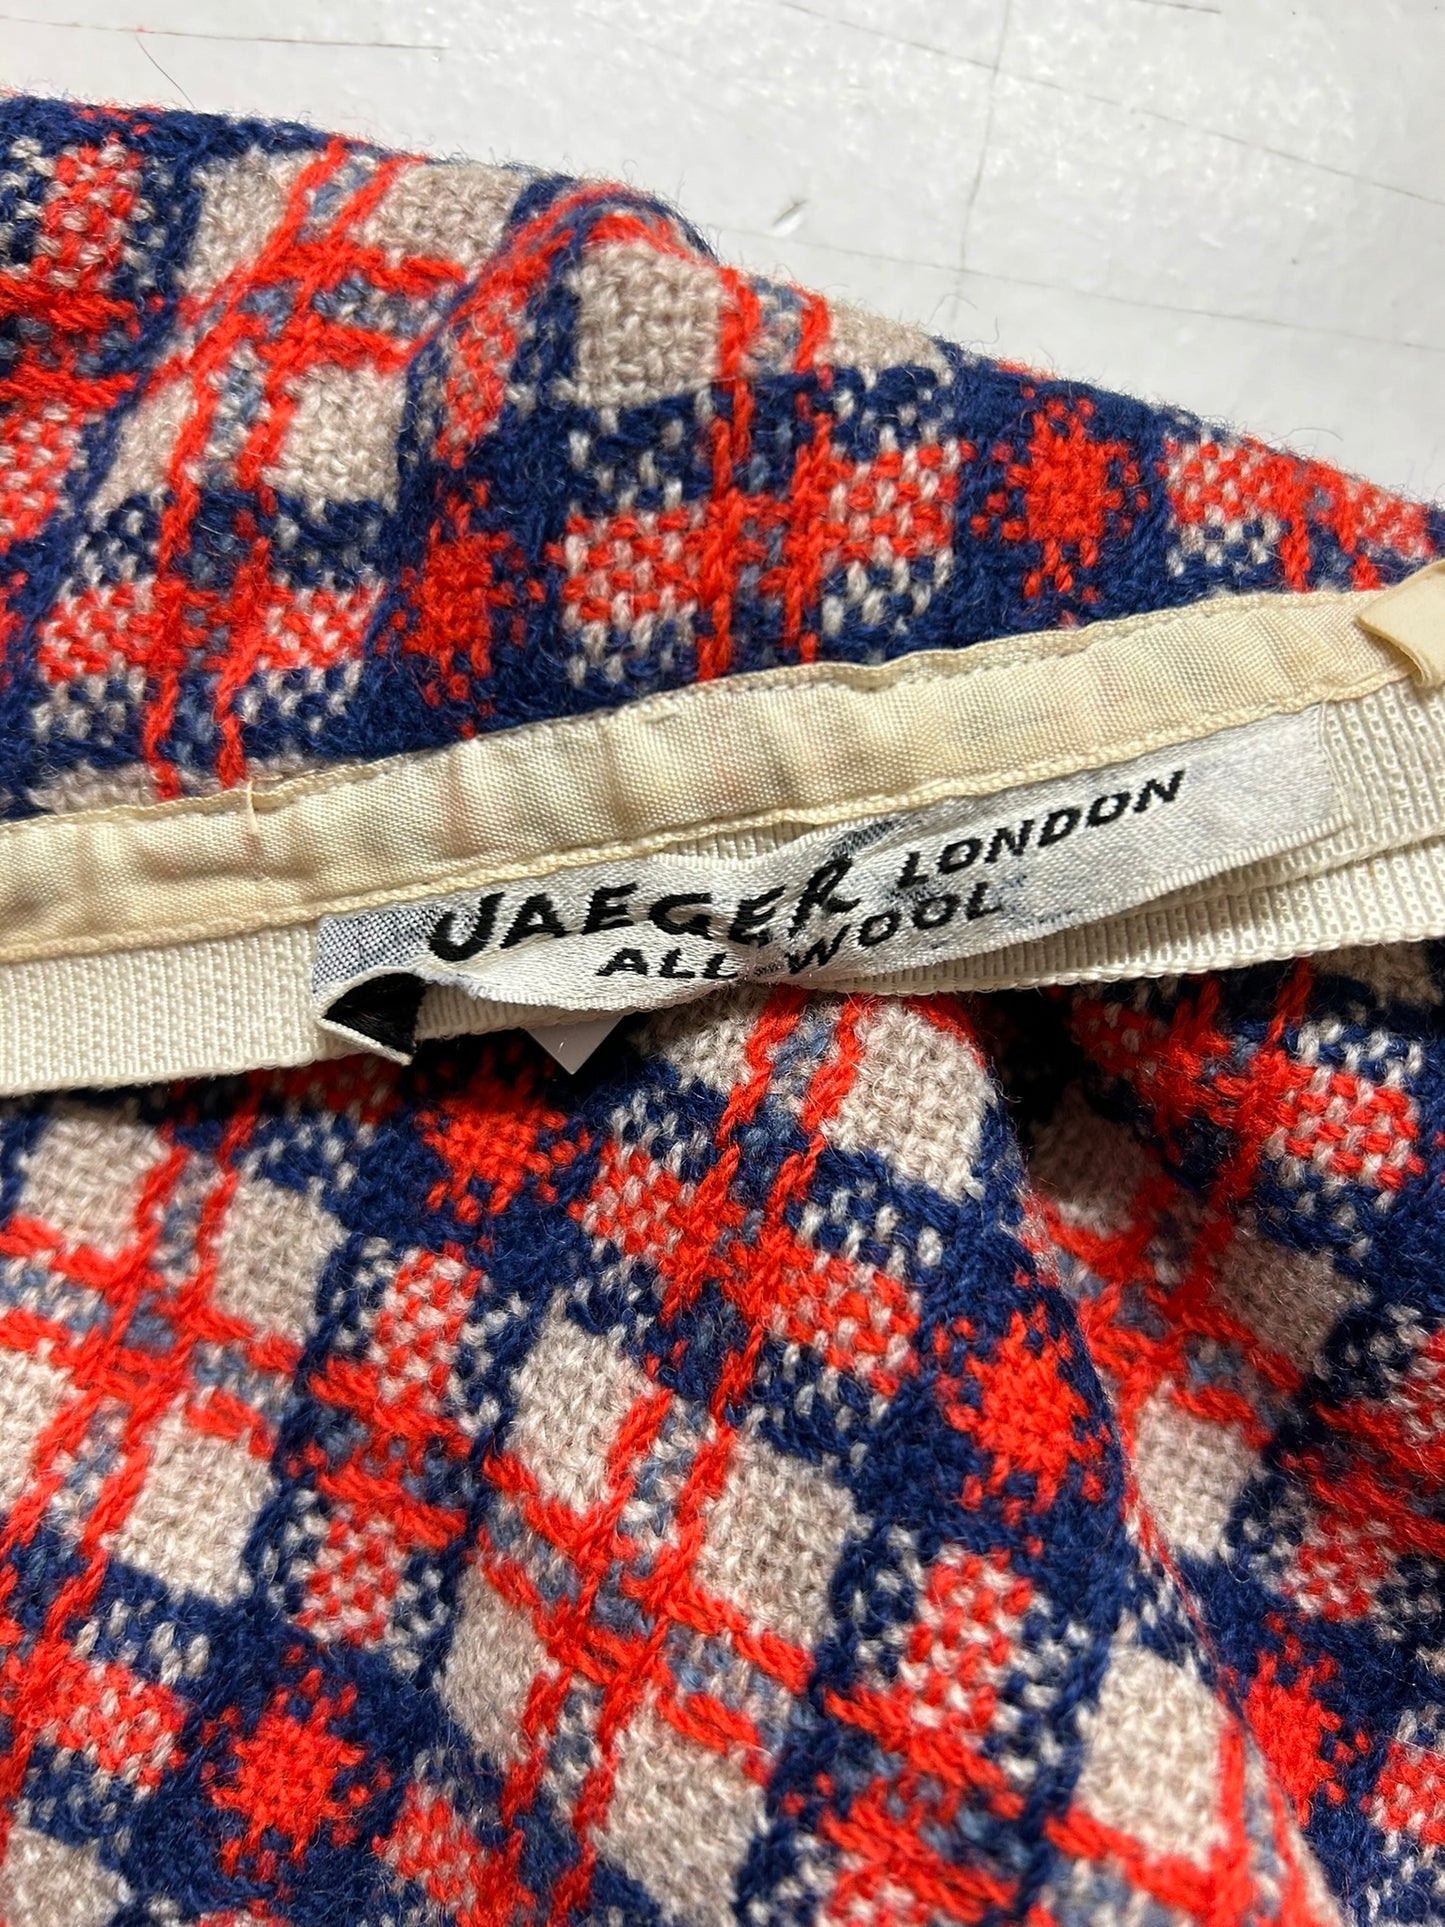 1960s Red & Blue Check Wool Skirt Size